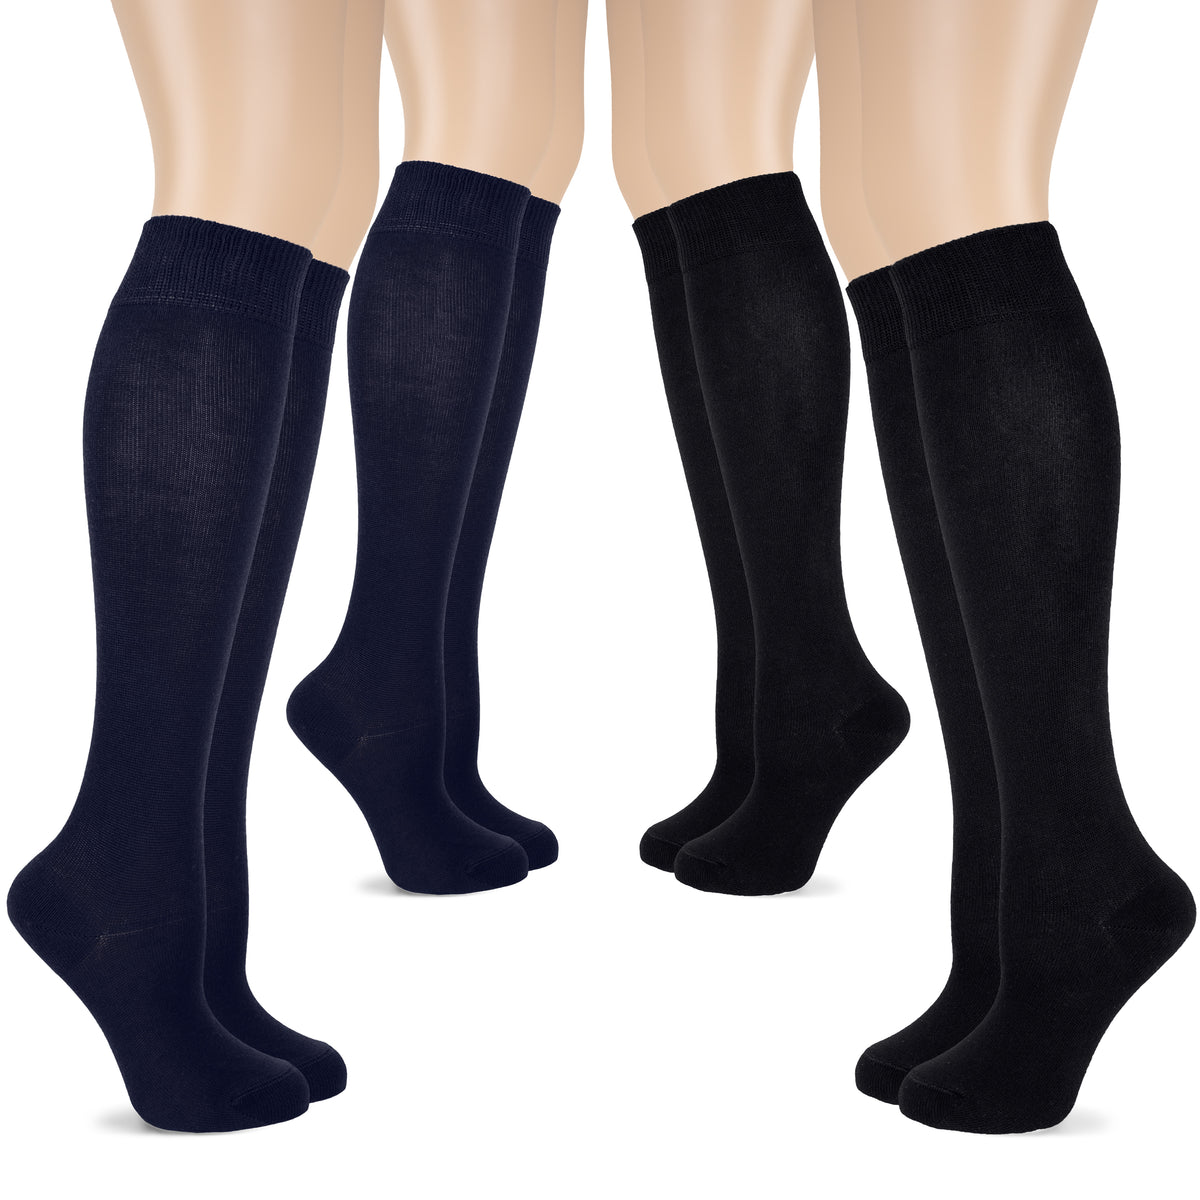 Stay cozy and chic with these knee-high cotton socks for women. This set includes four pairs in blue and black, perfect for any outfit.